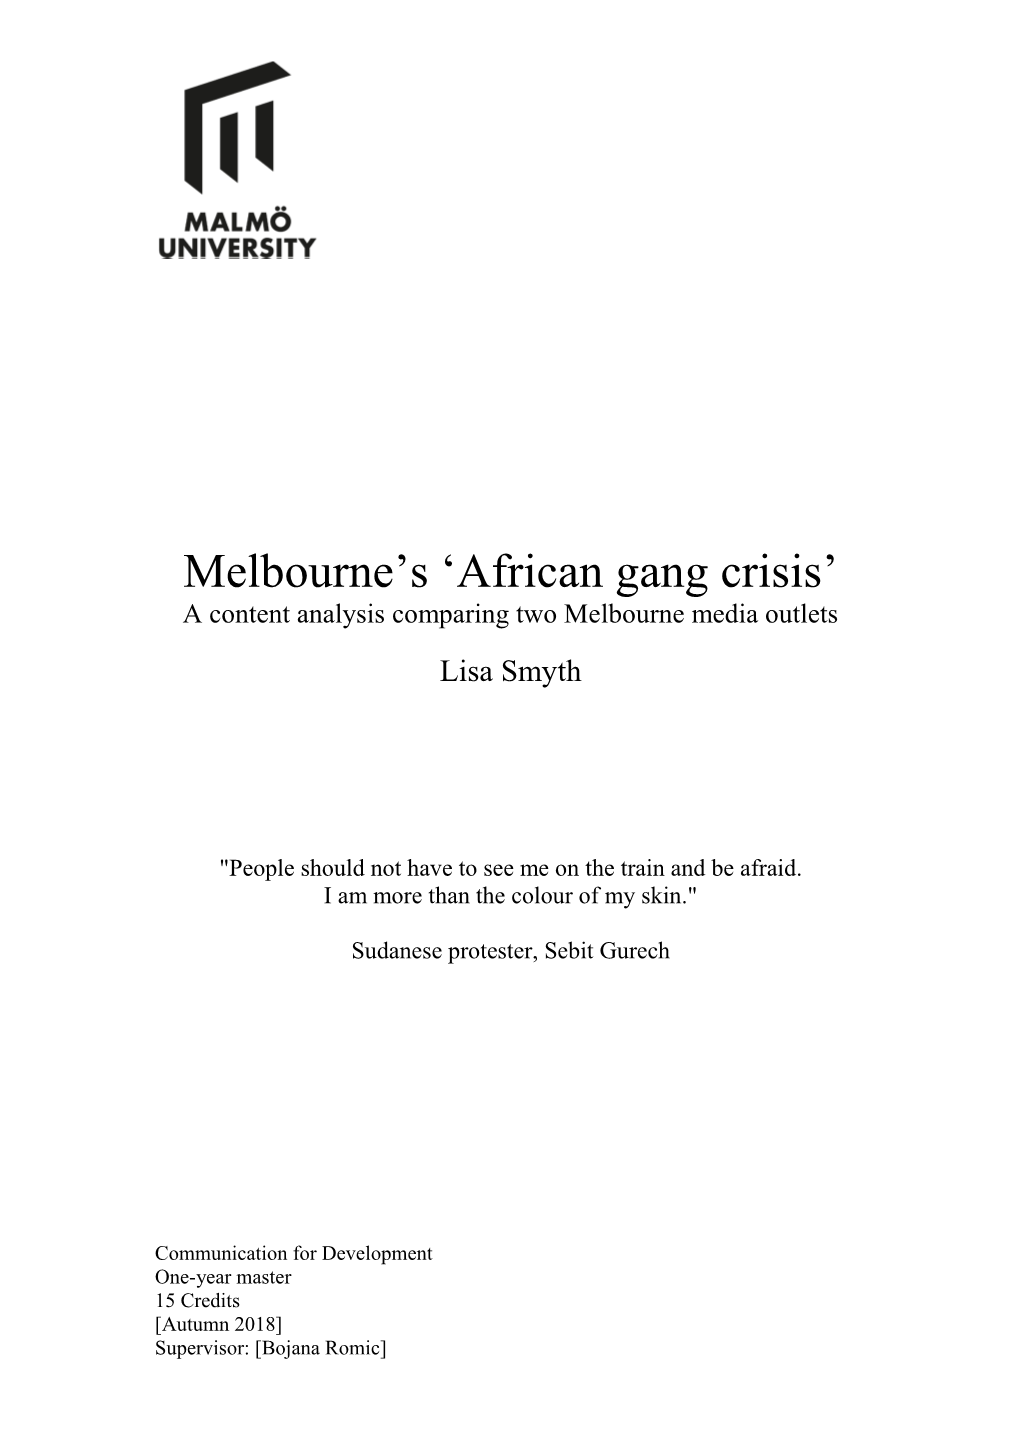 Melbourne's 'African Gang Crisis'